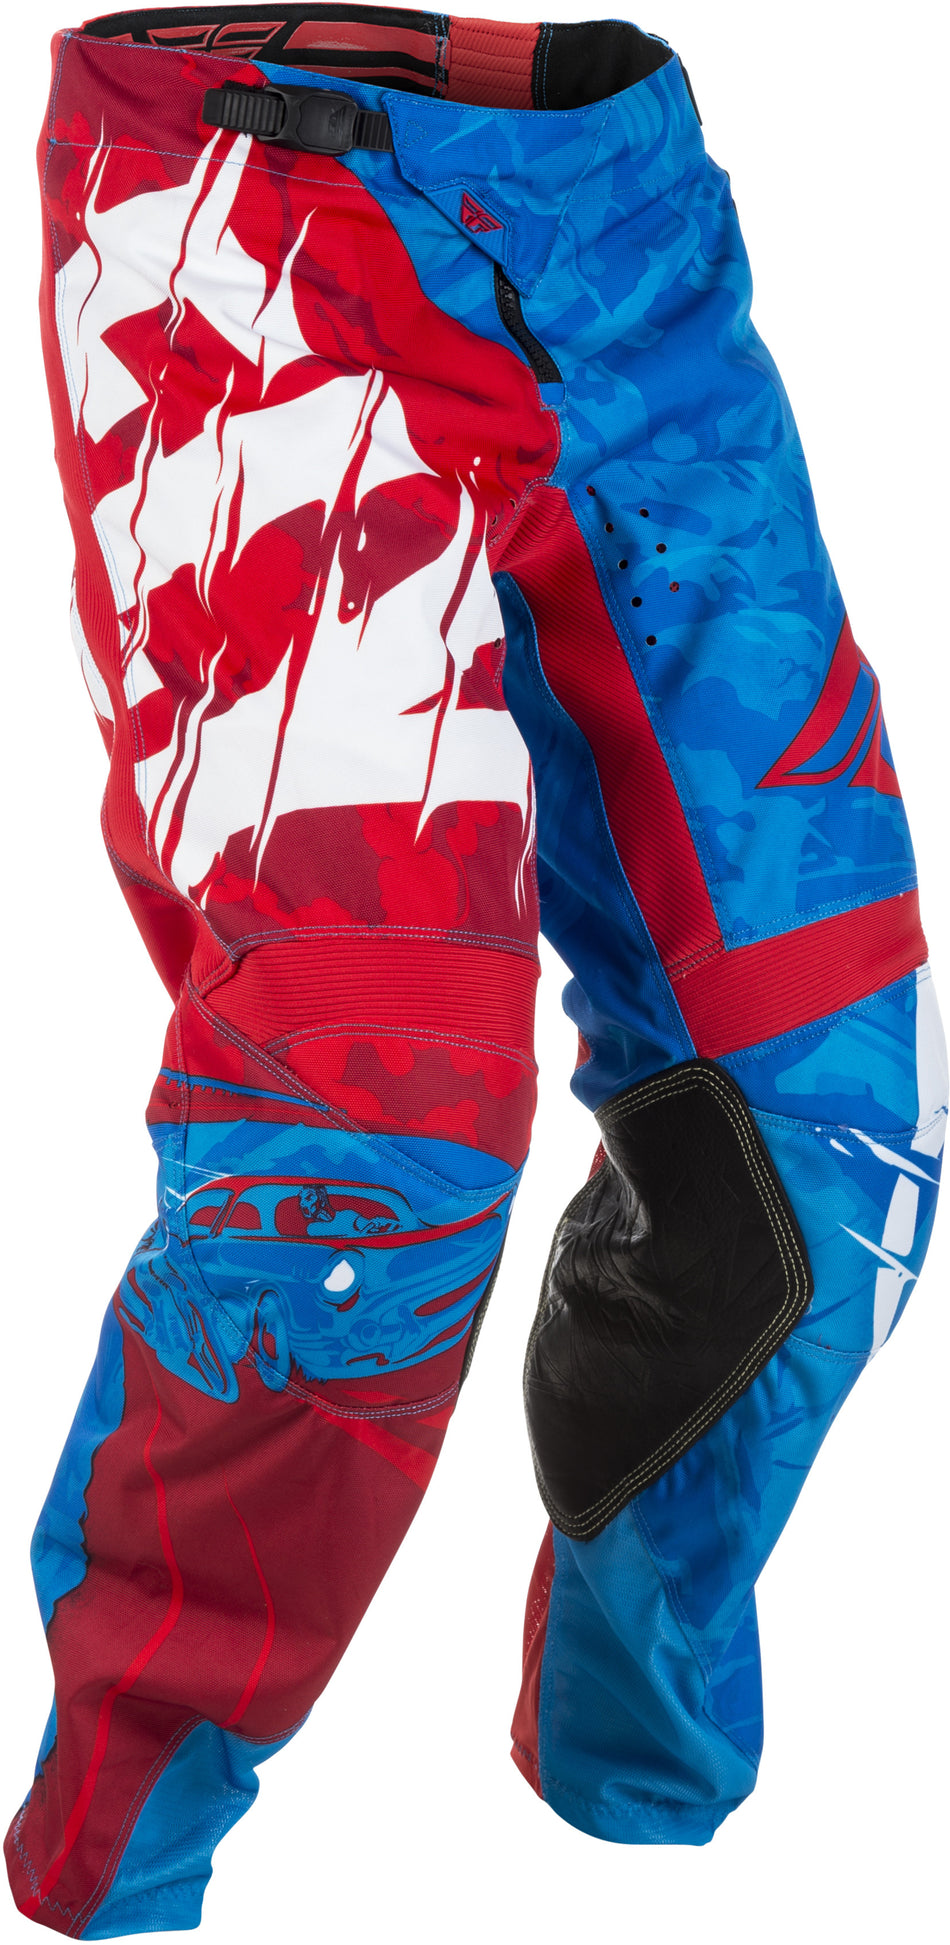 FLY RACING Kinetic Outlaw Pants Red/Blue Sz 22 371-53222